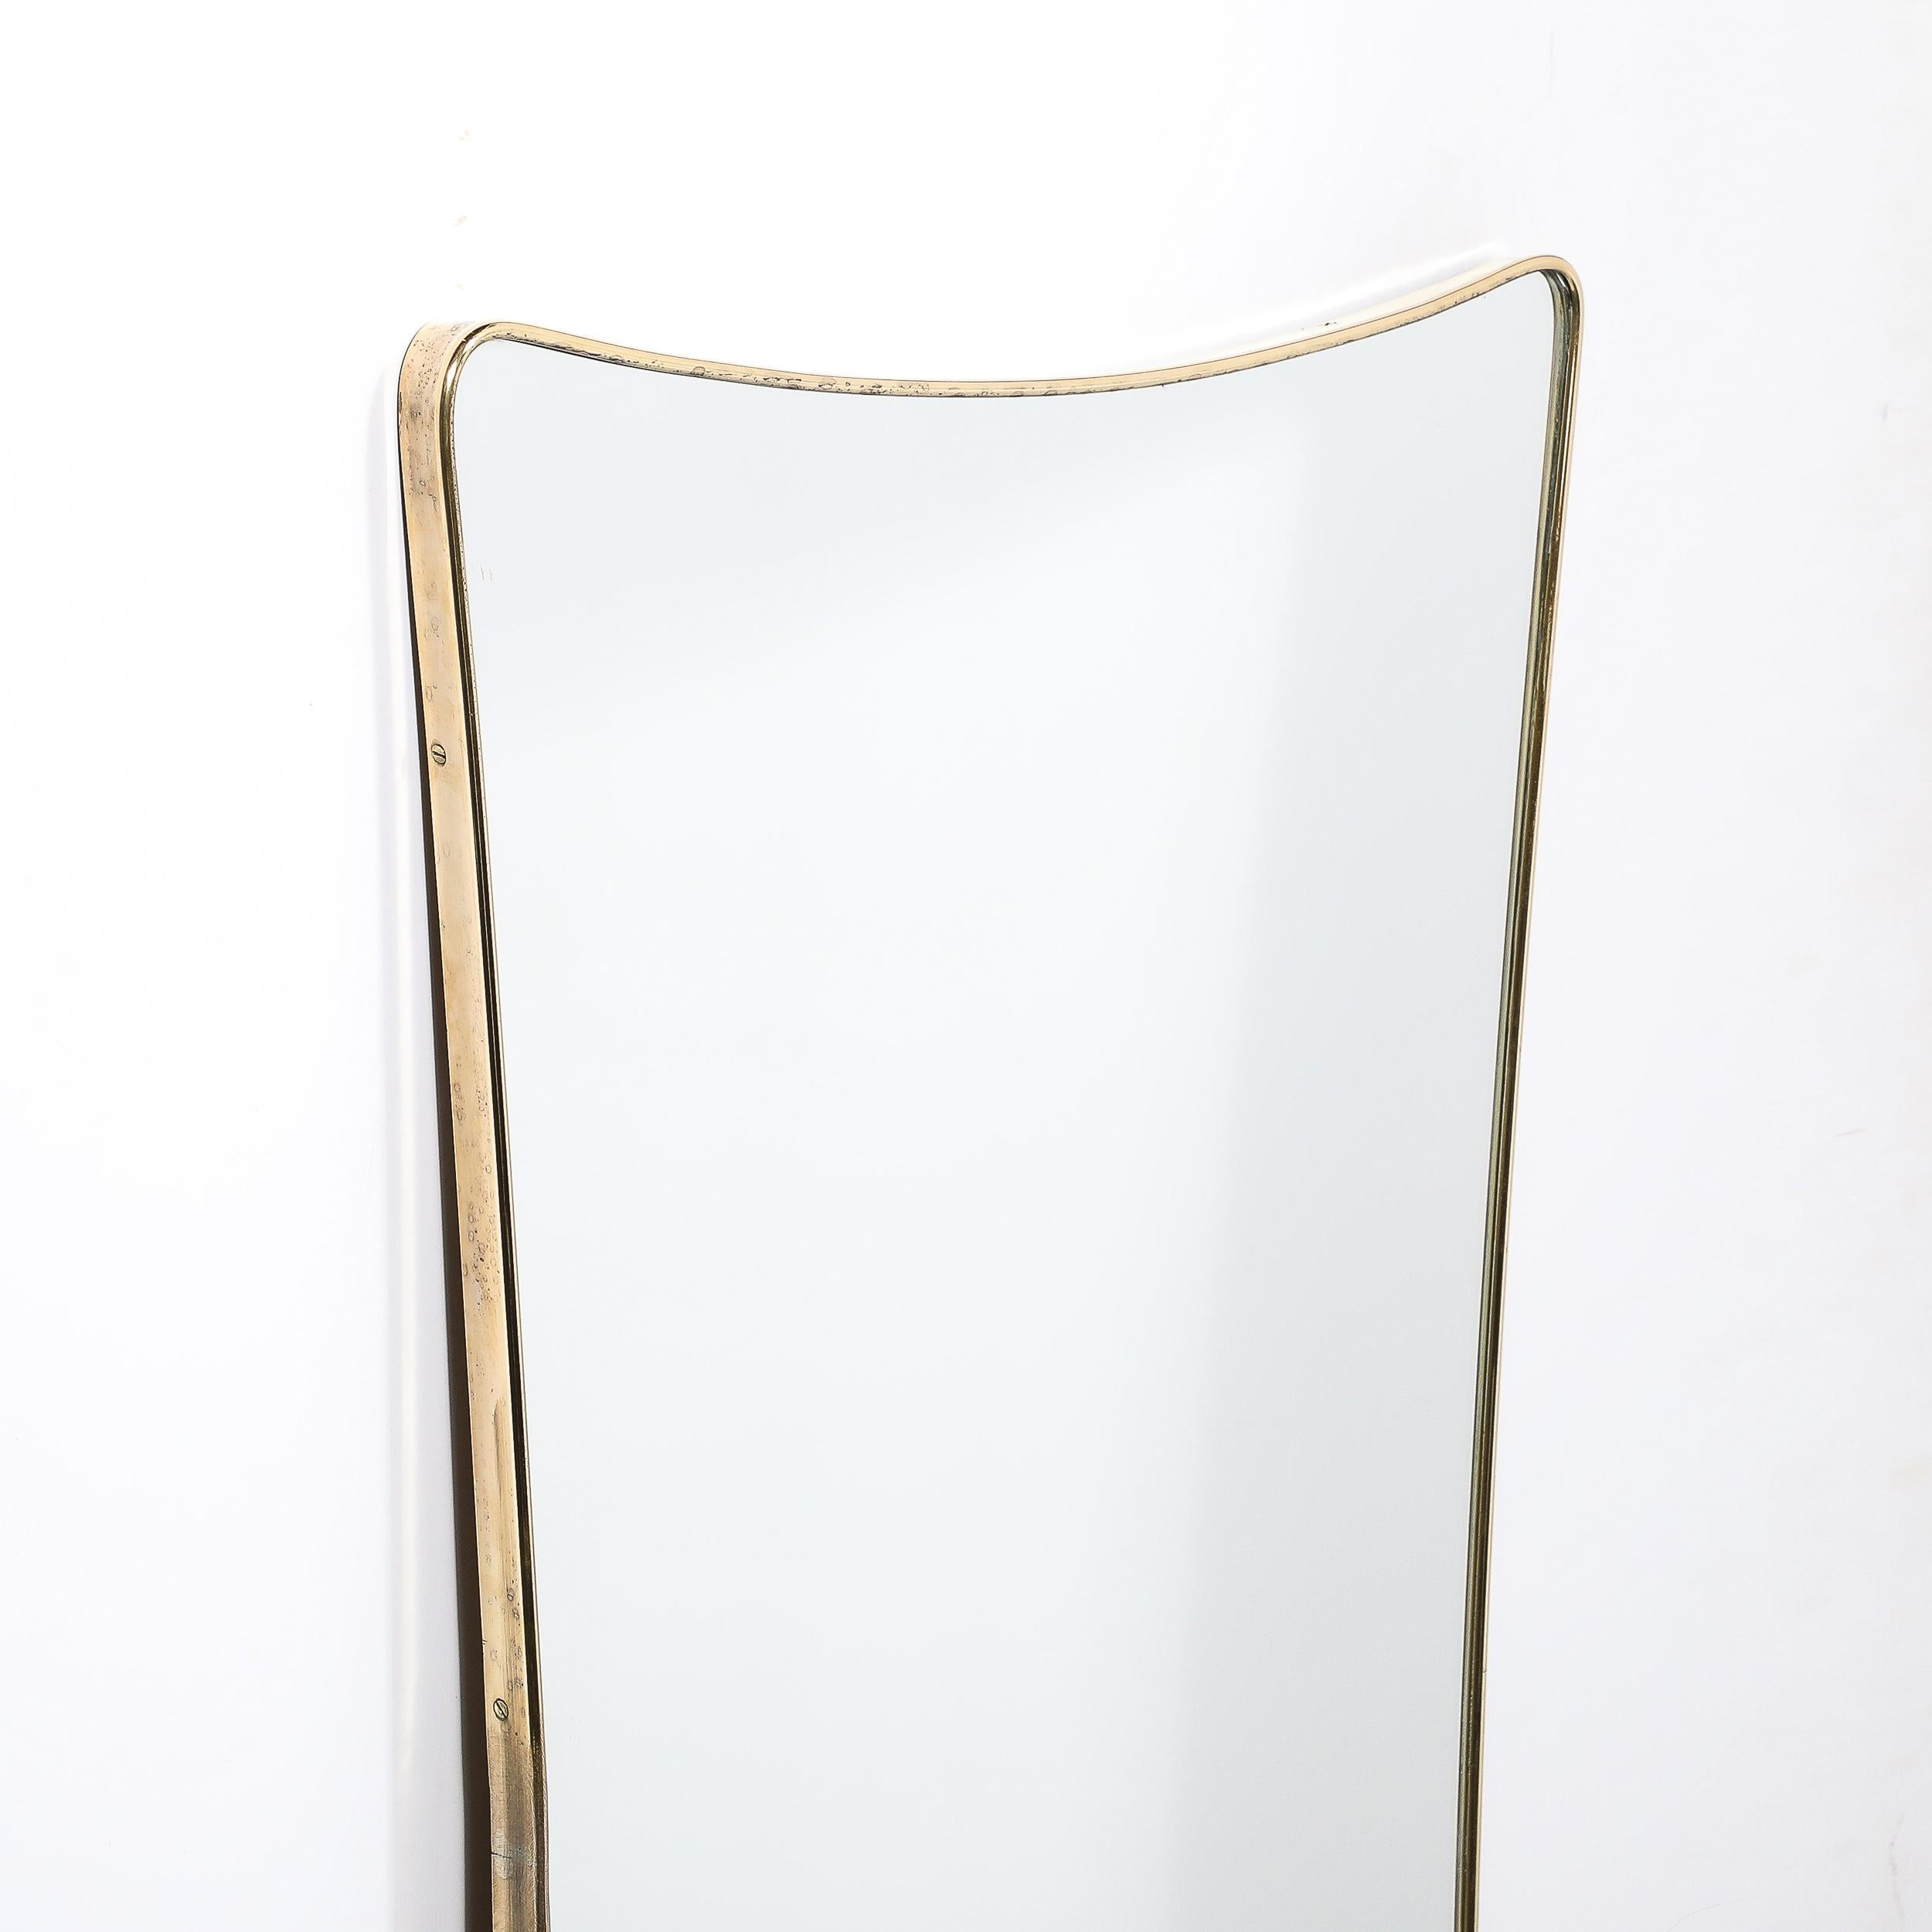 Italian Mid-Century Modernist Tapered Atomic Form Brass Wrapped Mirror